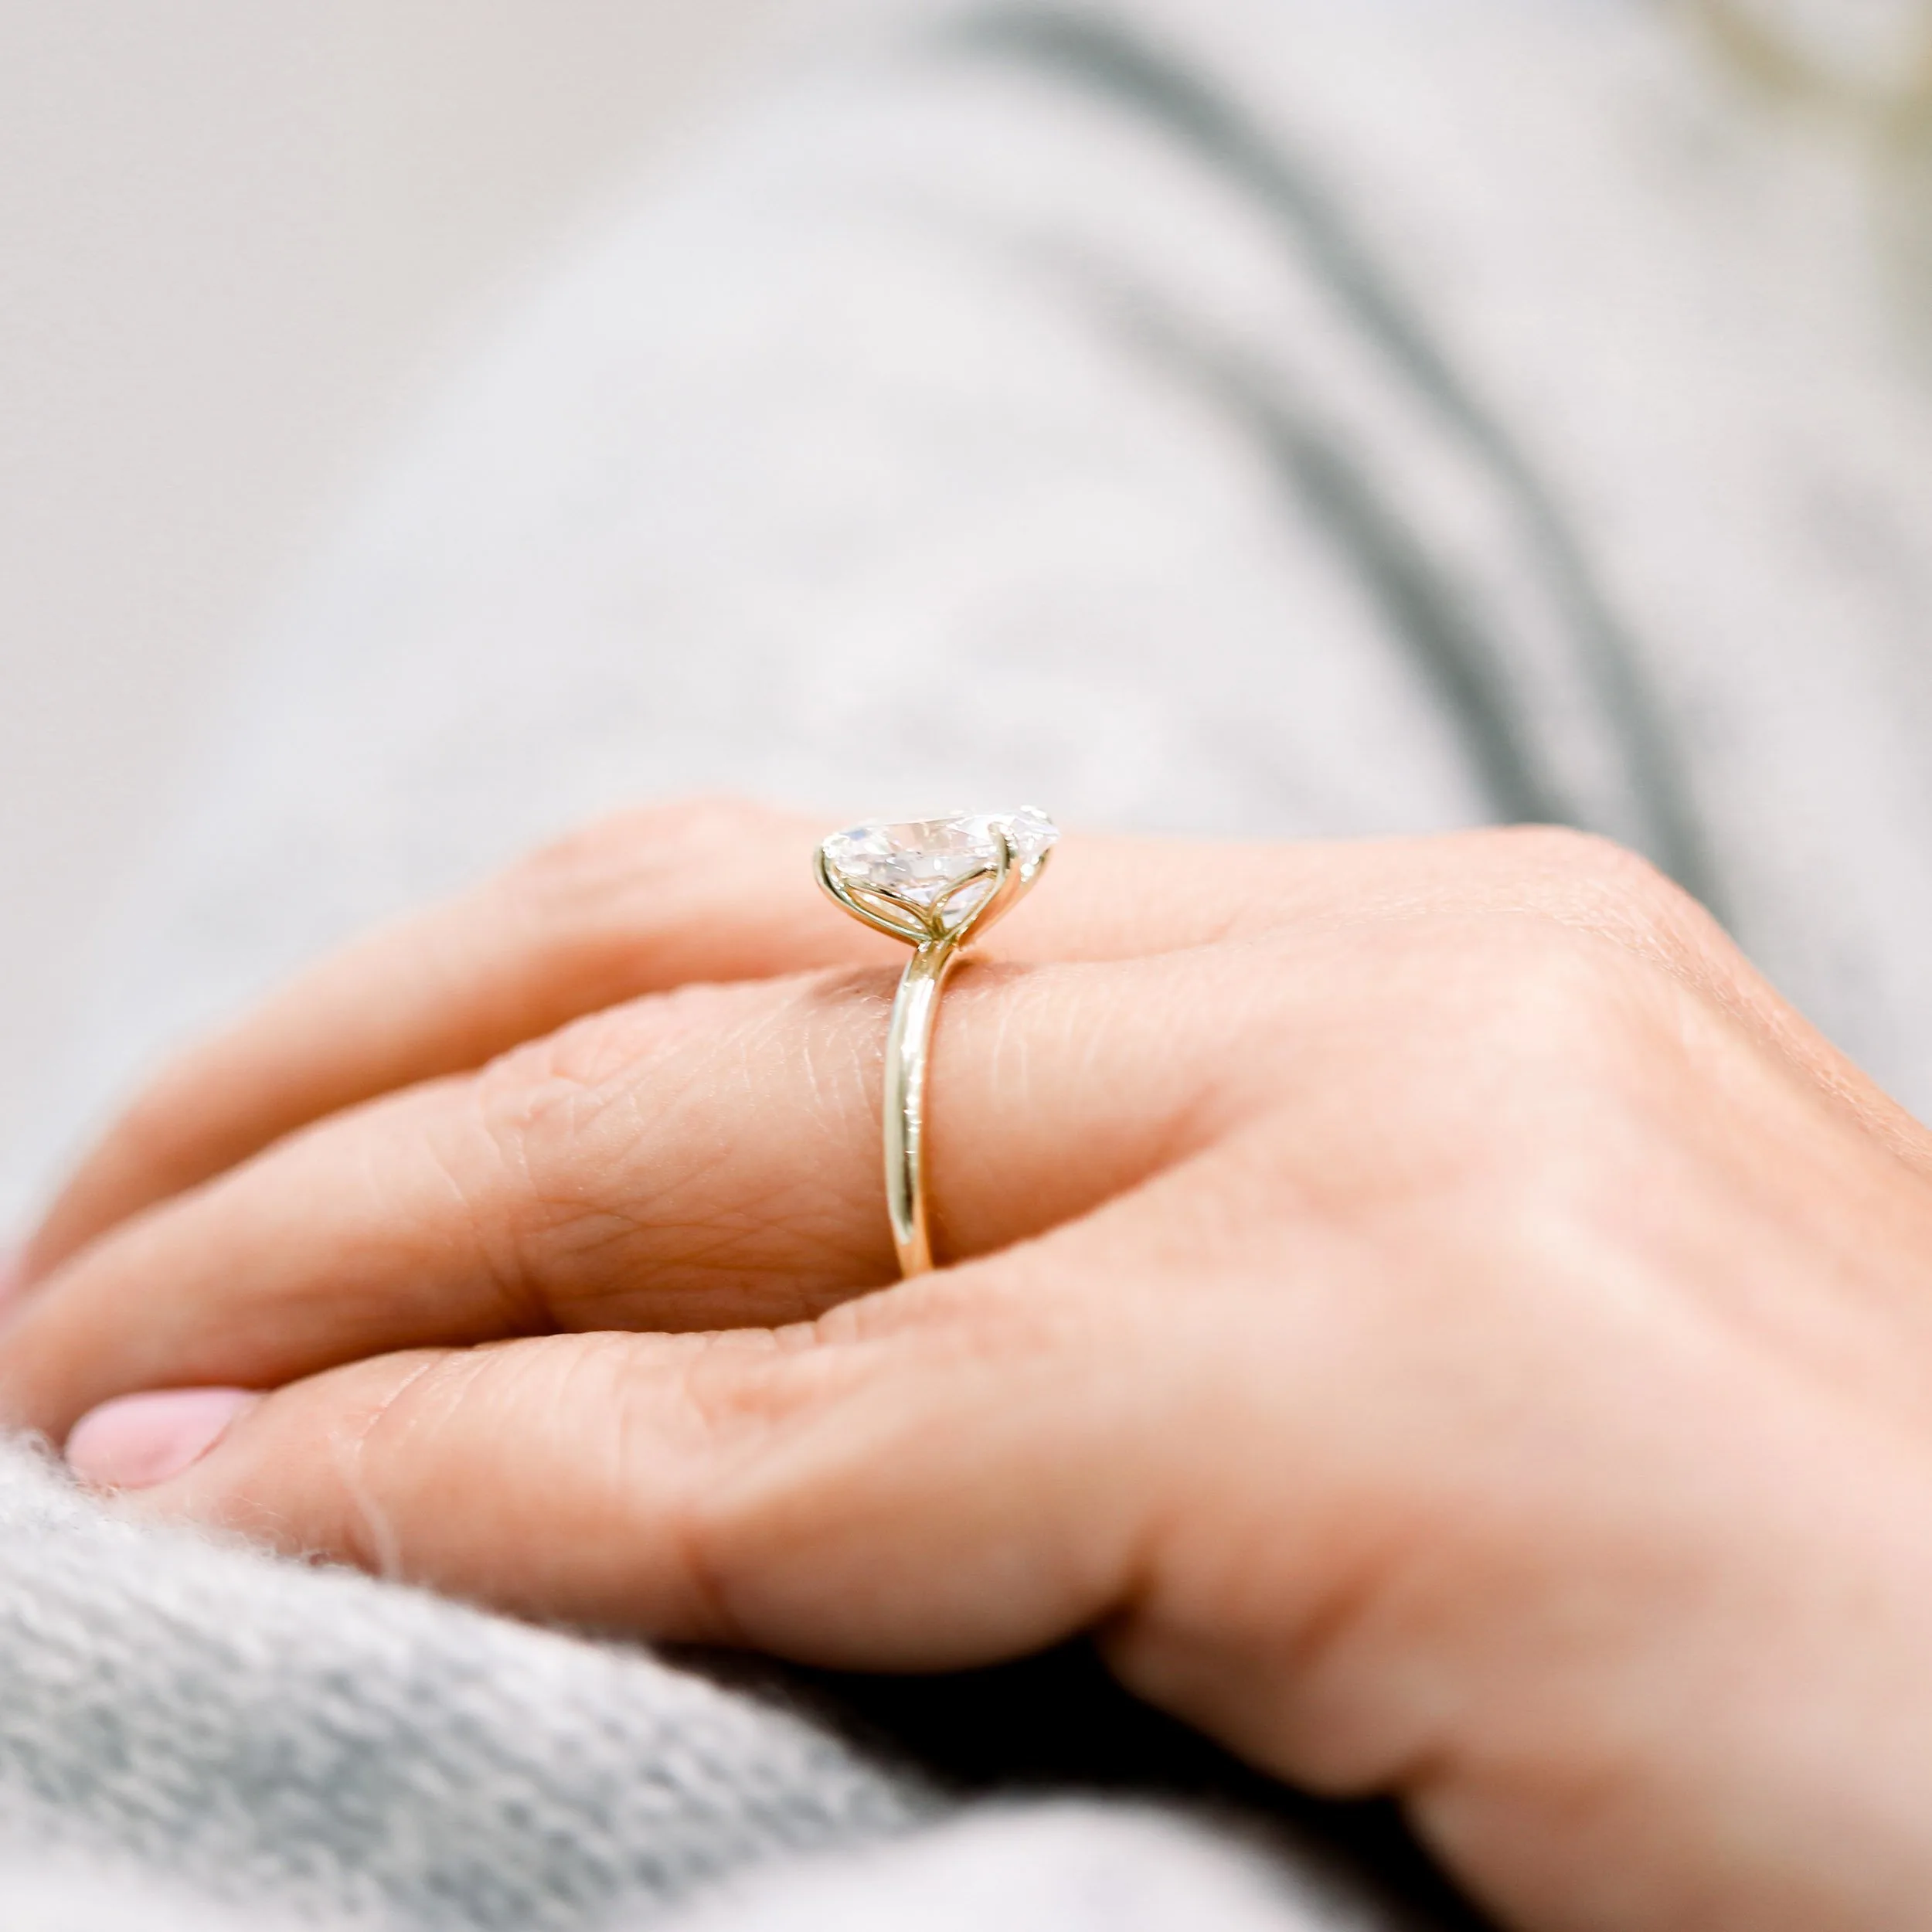 yellow-gold-floral-basket-solitaire-engagement-ring_1644816438273-BEO98YK2NFDV6AV1RIC4